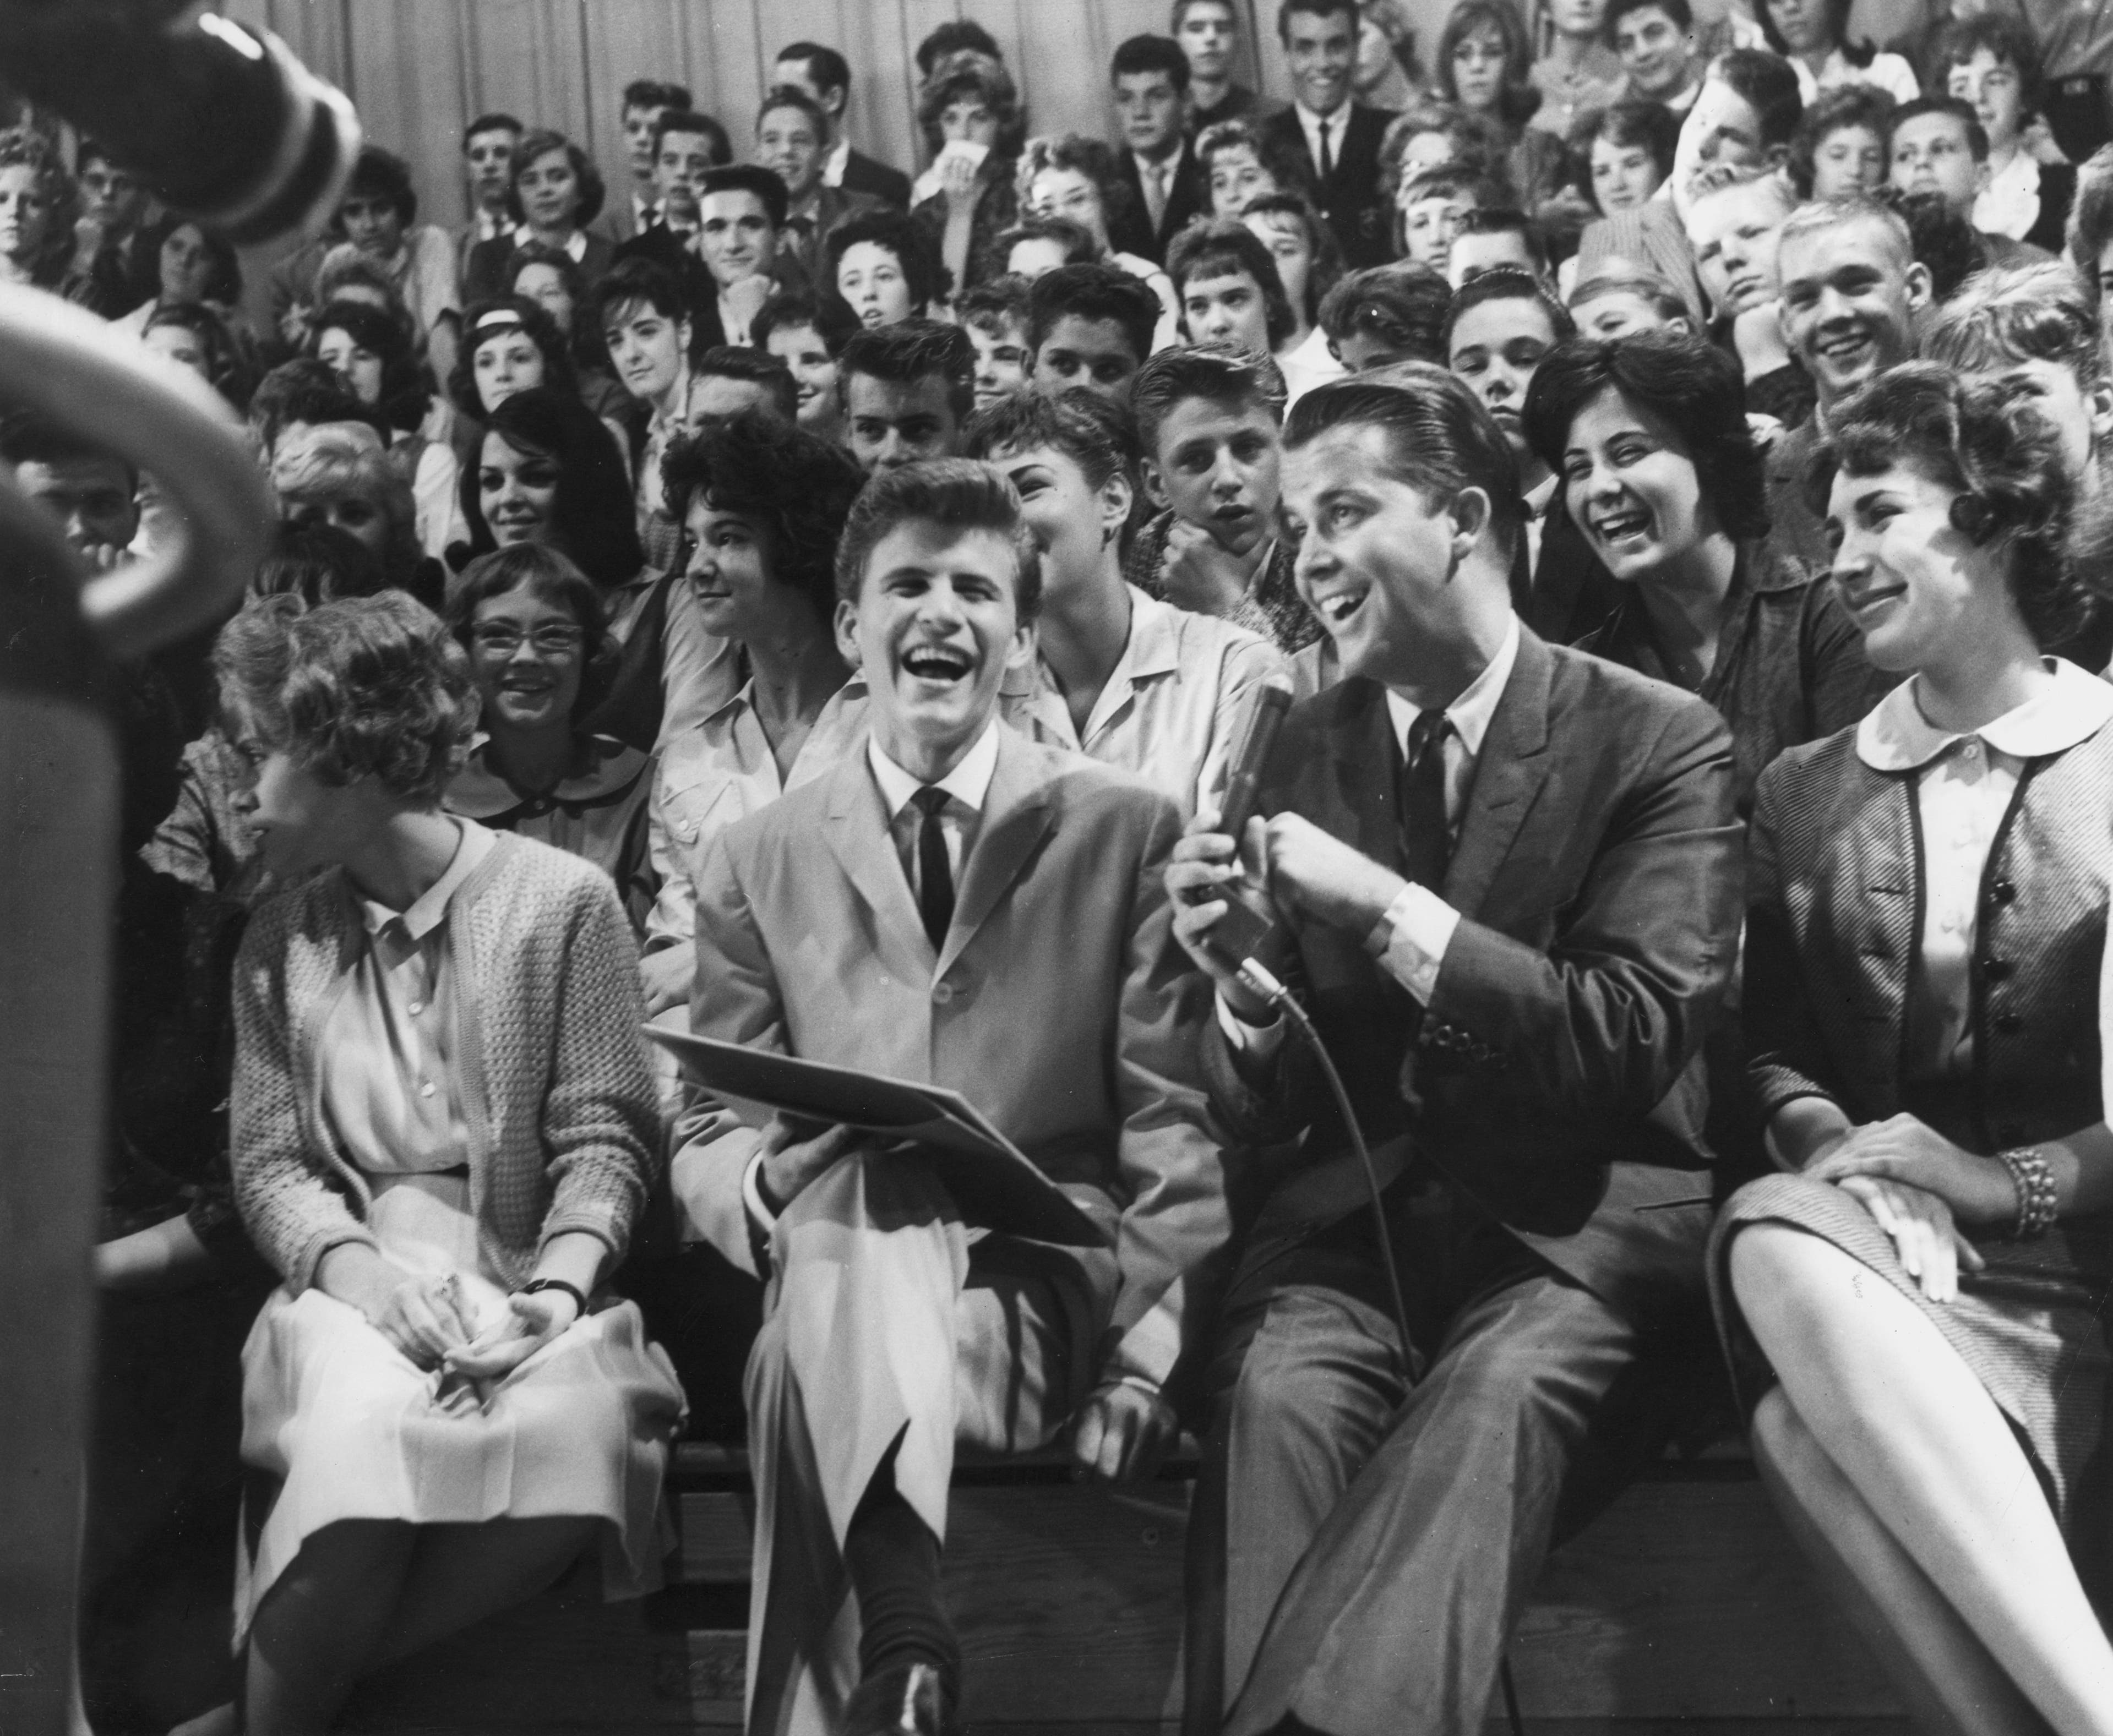 On this day in history, August 5, 1957, 'American Bandstand' makes national debut